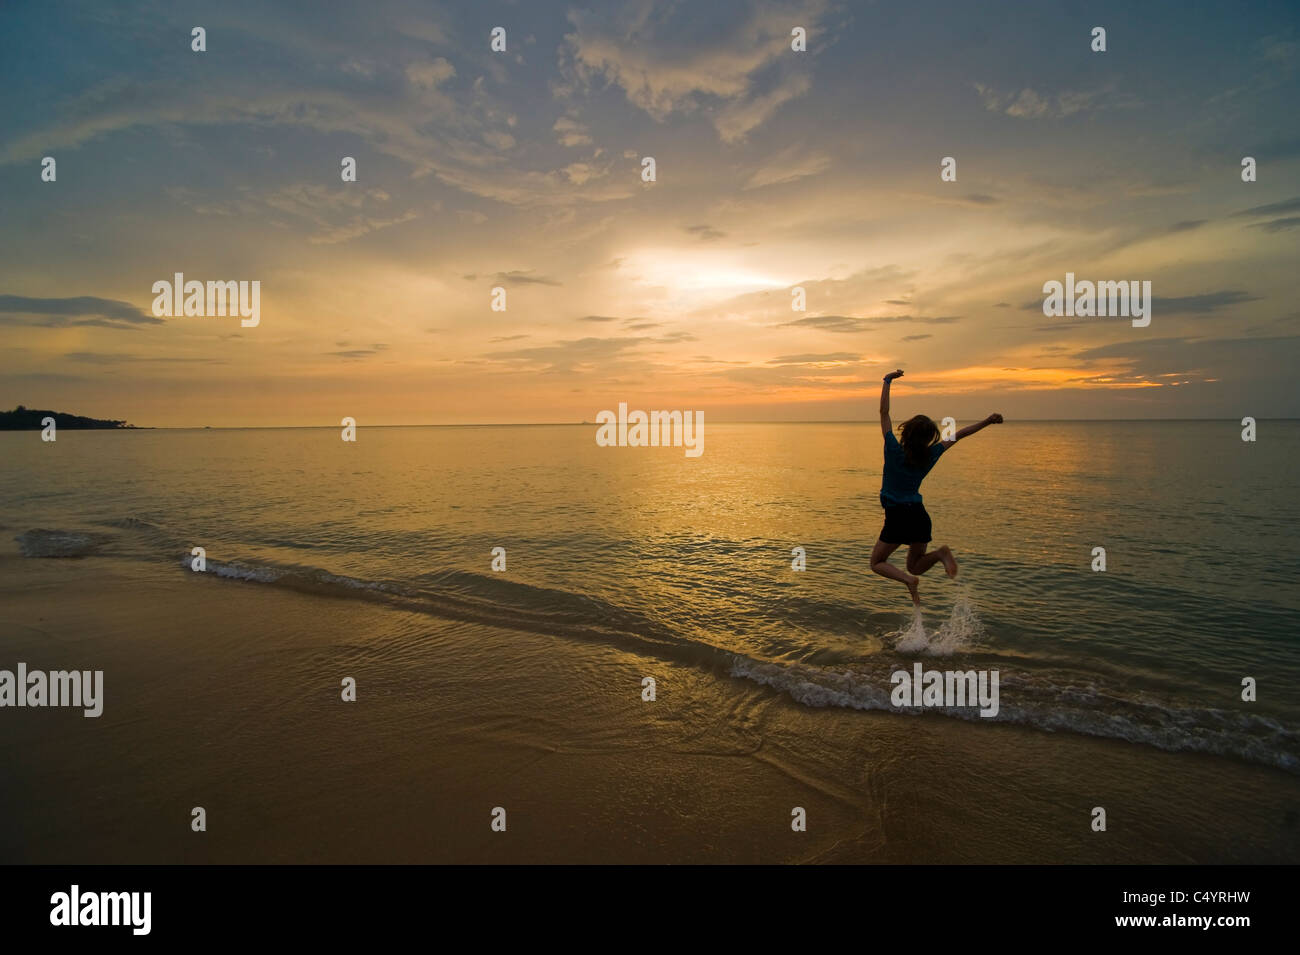 A young woman jumping for joy and celebrating on the beach at sunset. Taken on Phra Ae Beach, Koh Lanta, South Thailand Stock Photo